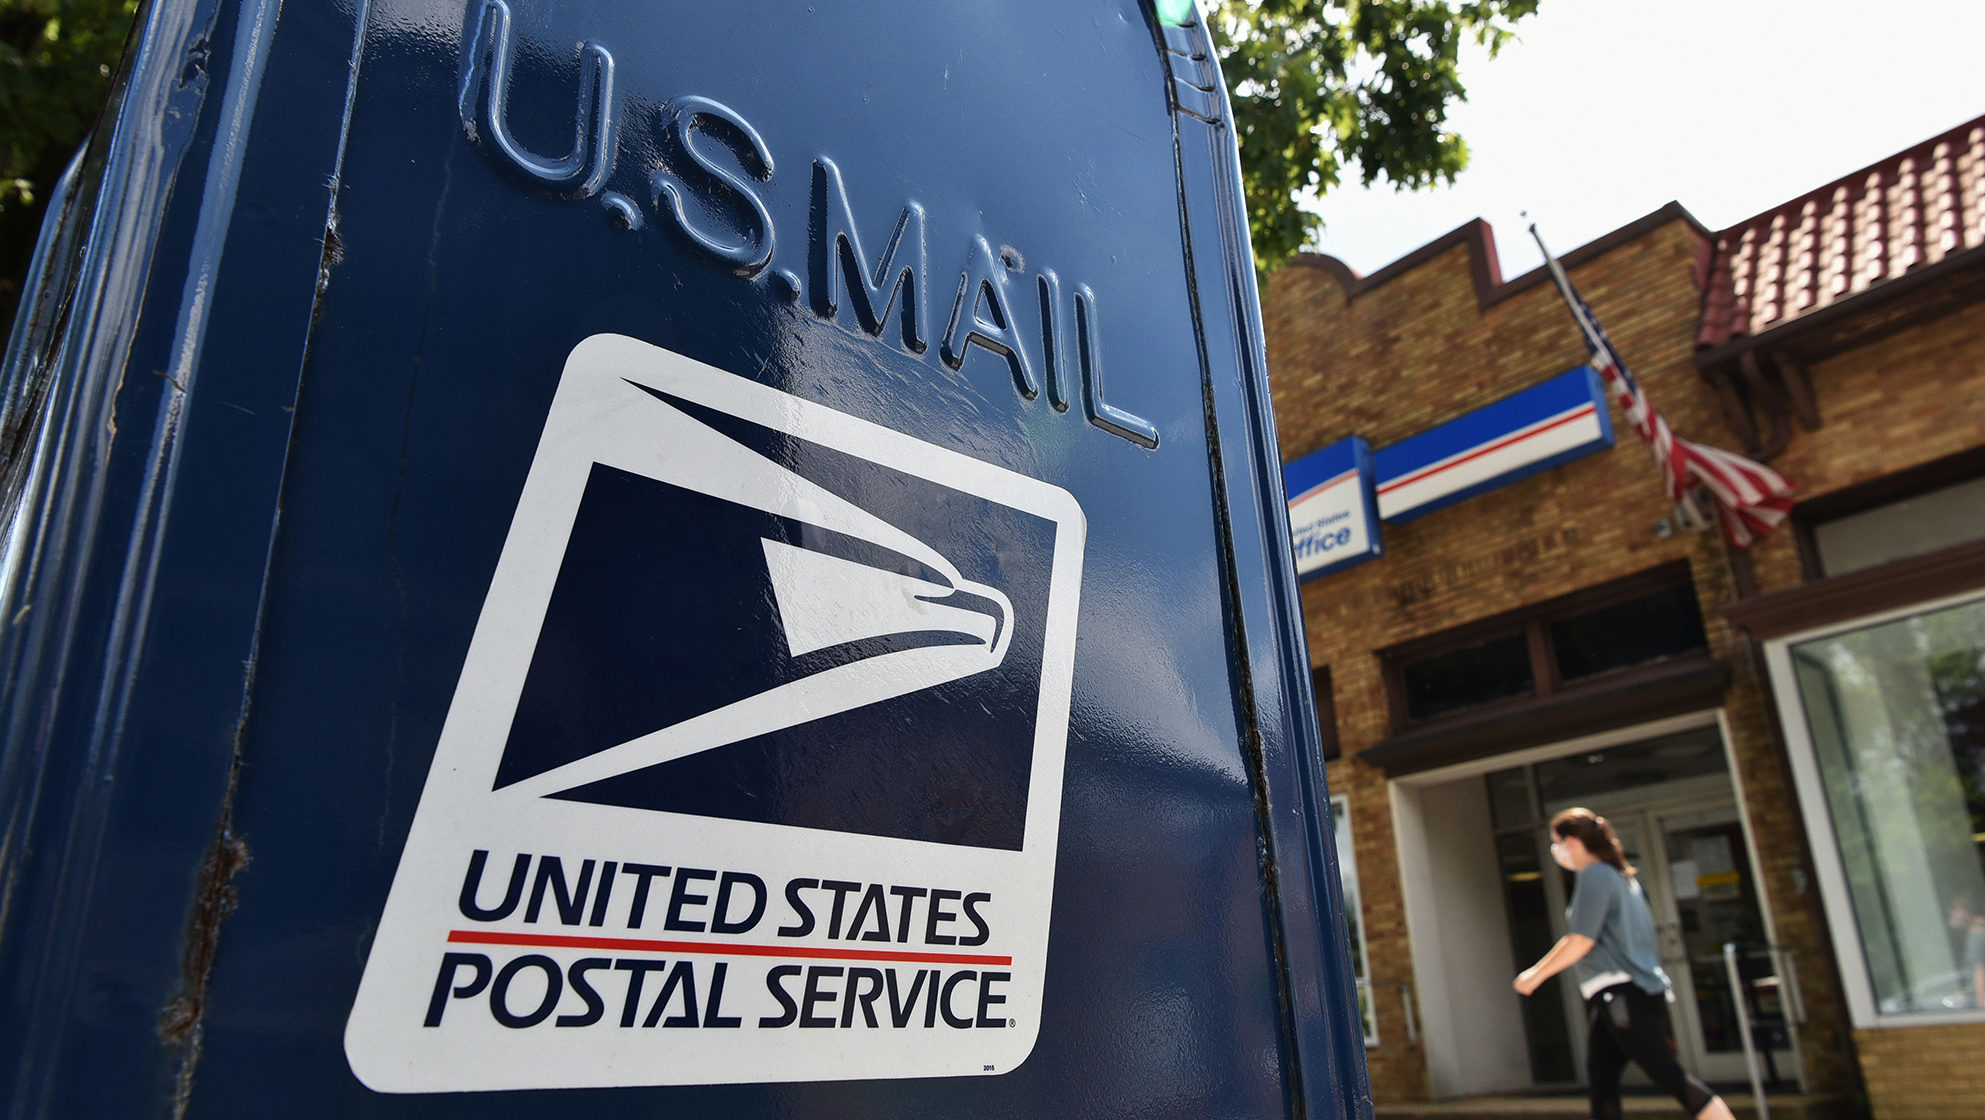 A former Salt Lake City Express Mail Clerk with the United States Postal Service was accused by a f...